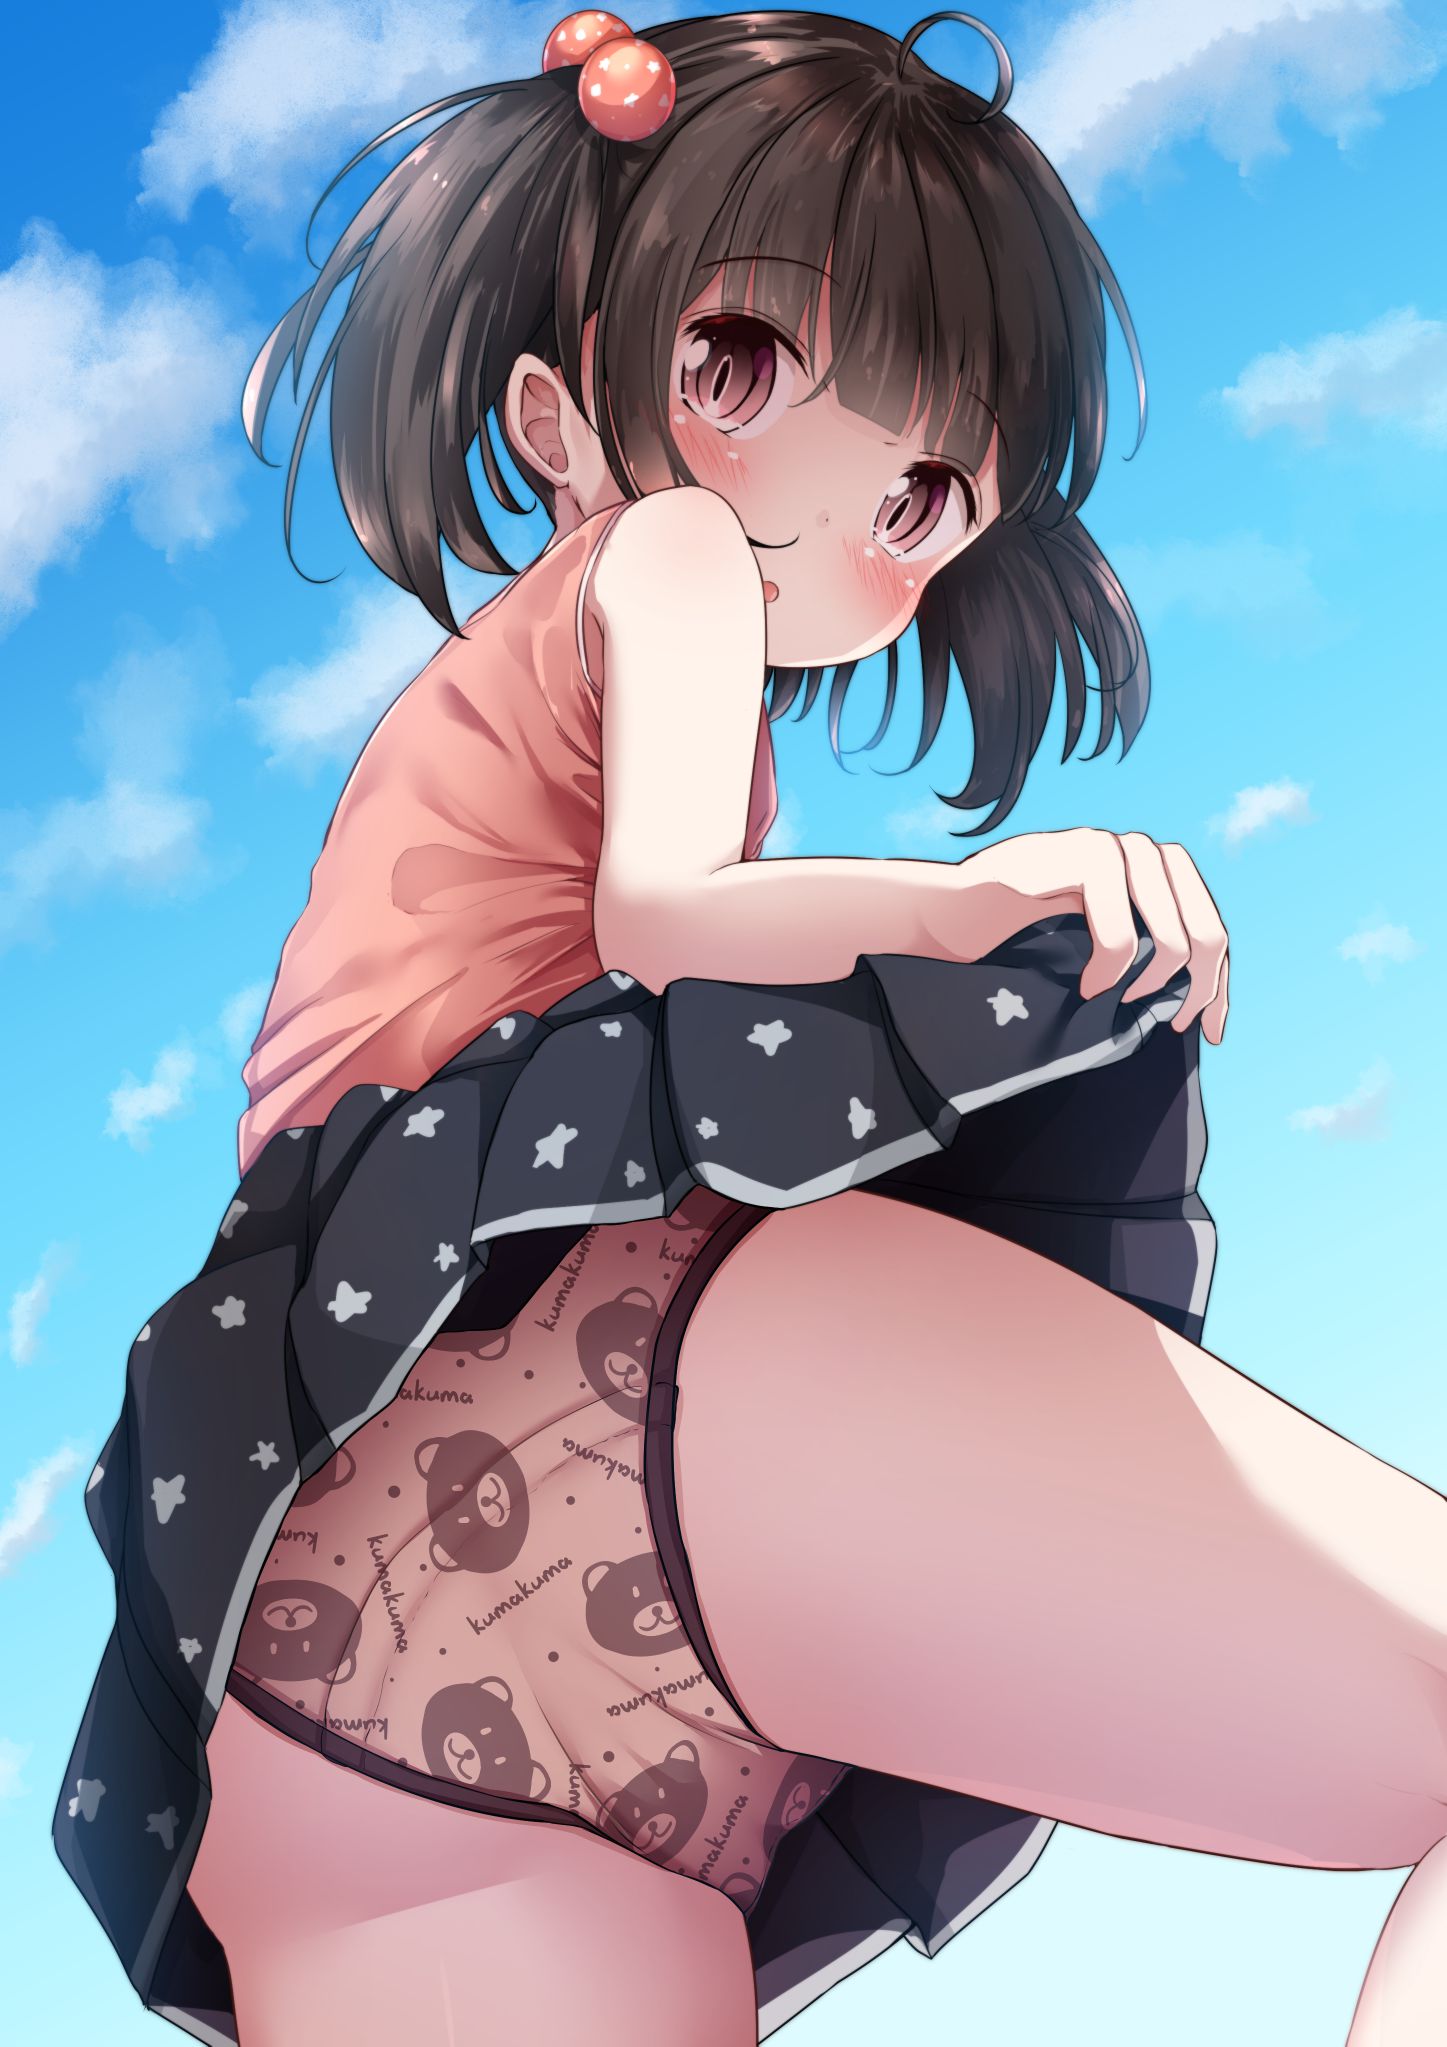 [Lori pants image] Loli pants secondary erotic image to become energetic on the weekend you want to spend looking at the cute pants of the secondary Loli girl 39